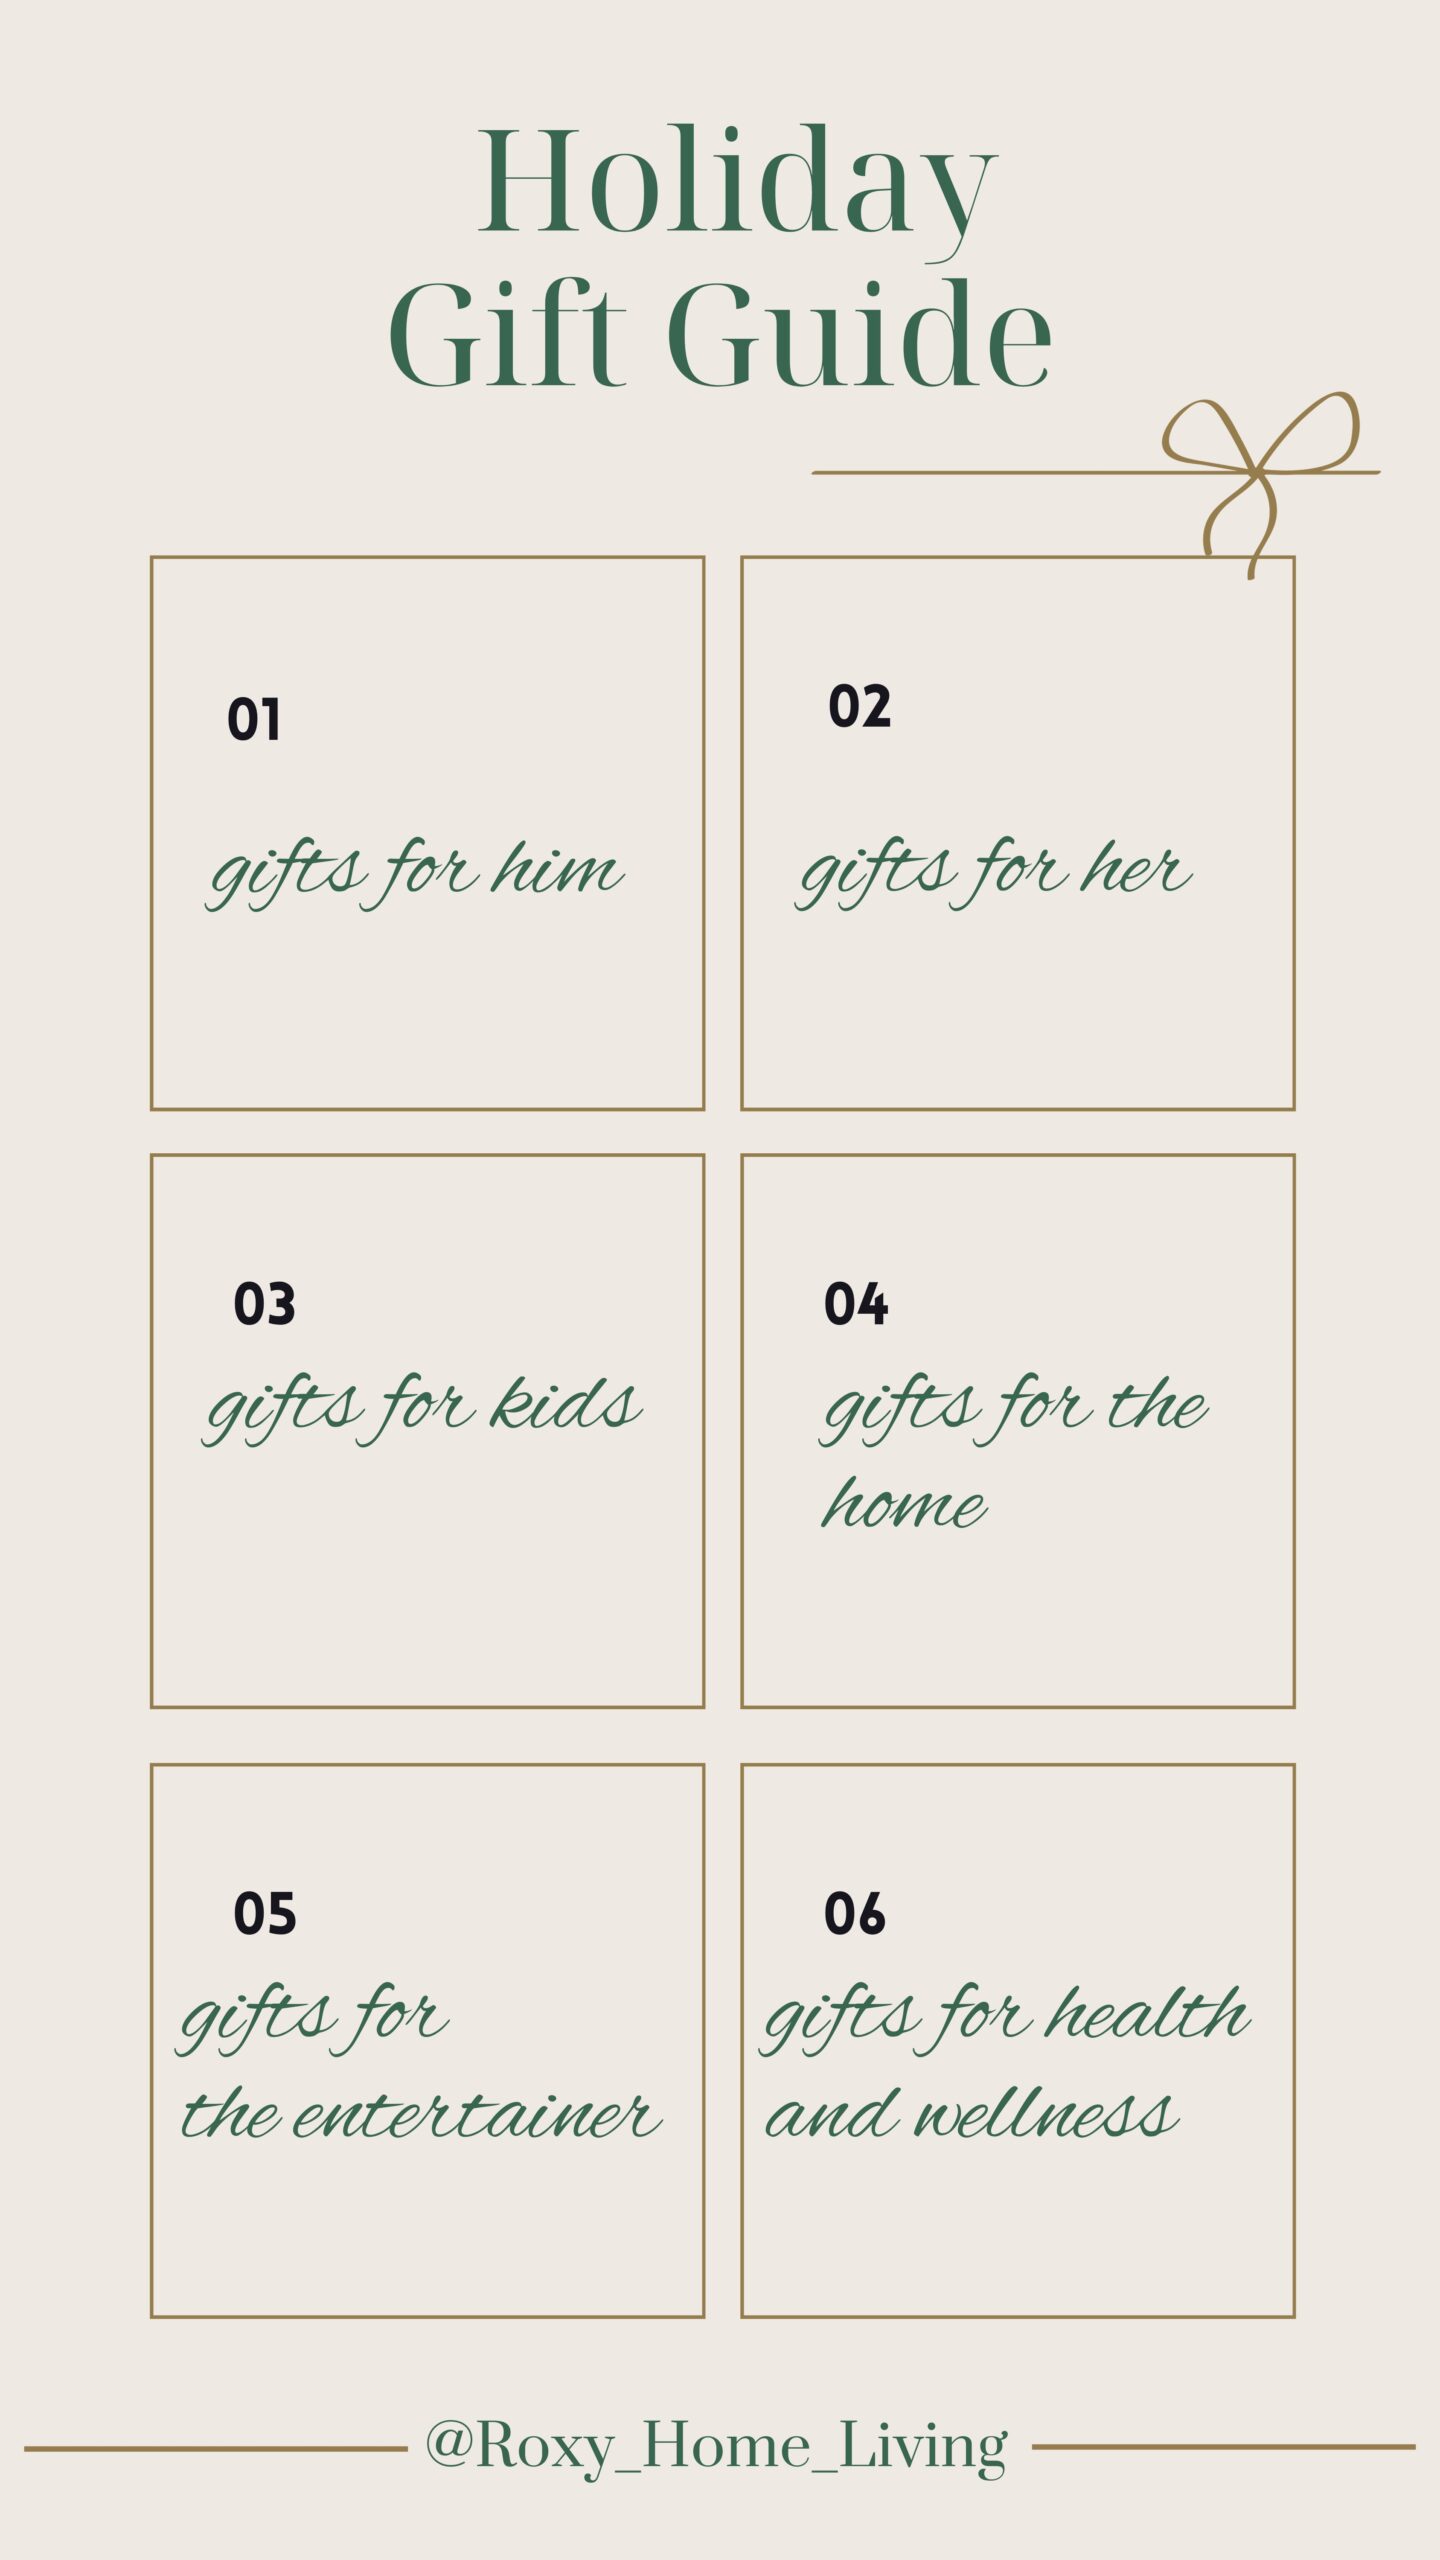 Gift Guide Table of Contents